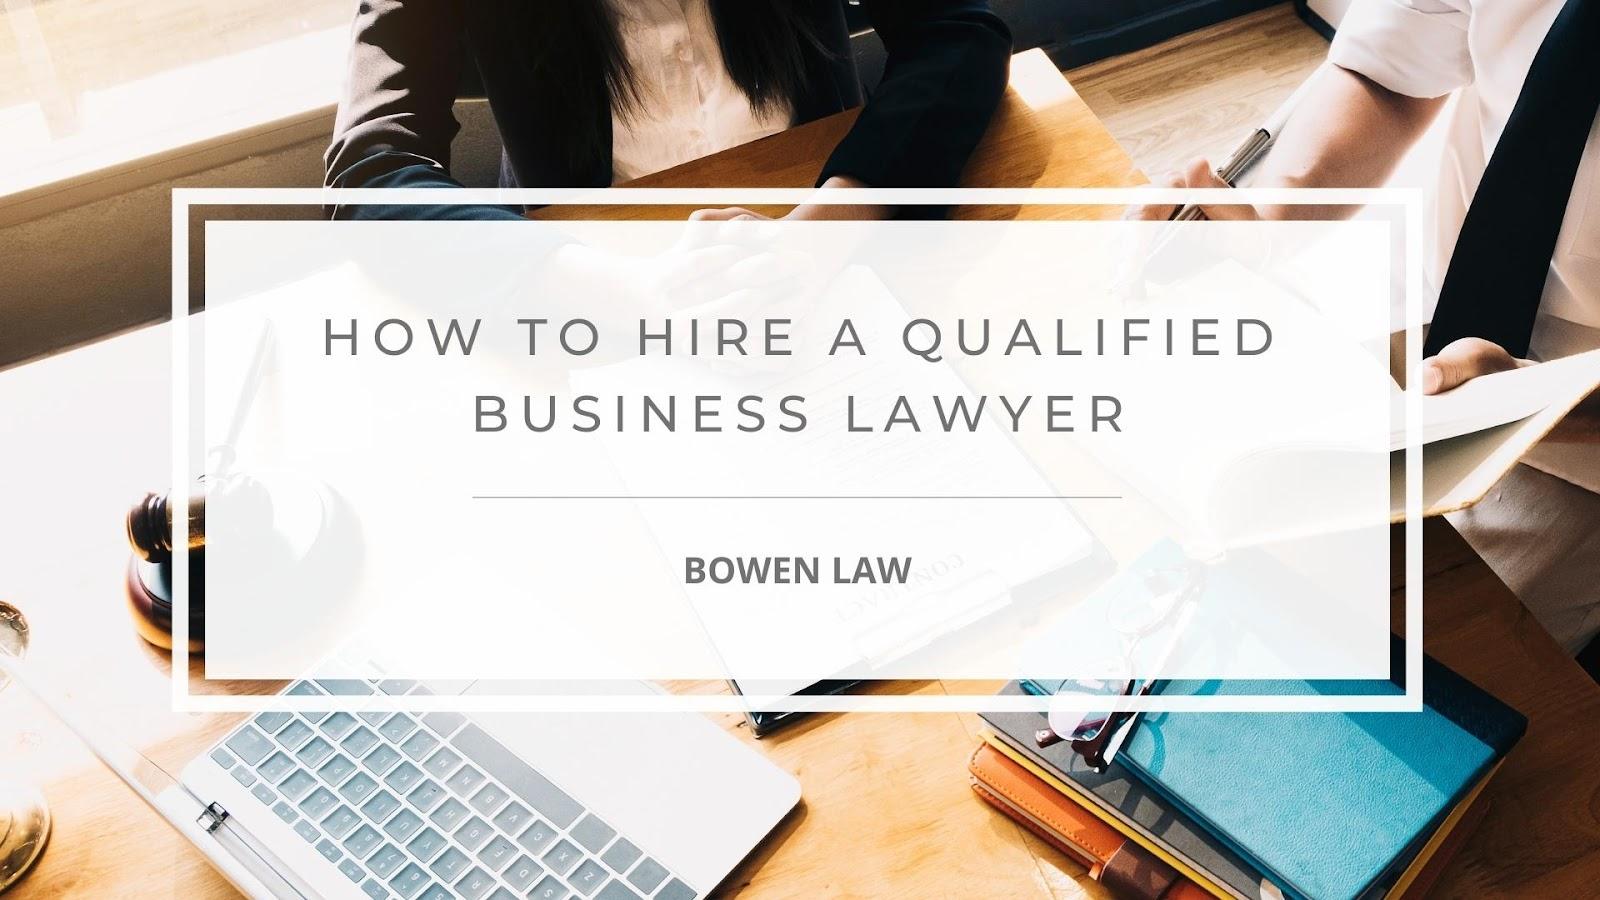 Featured Image of how to hire a qualified business lawyer